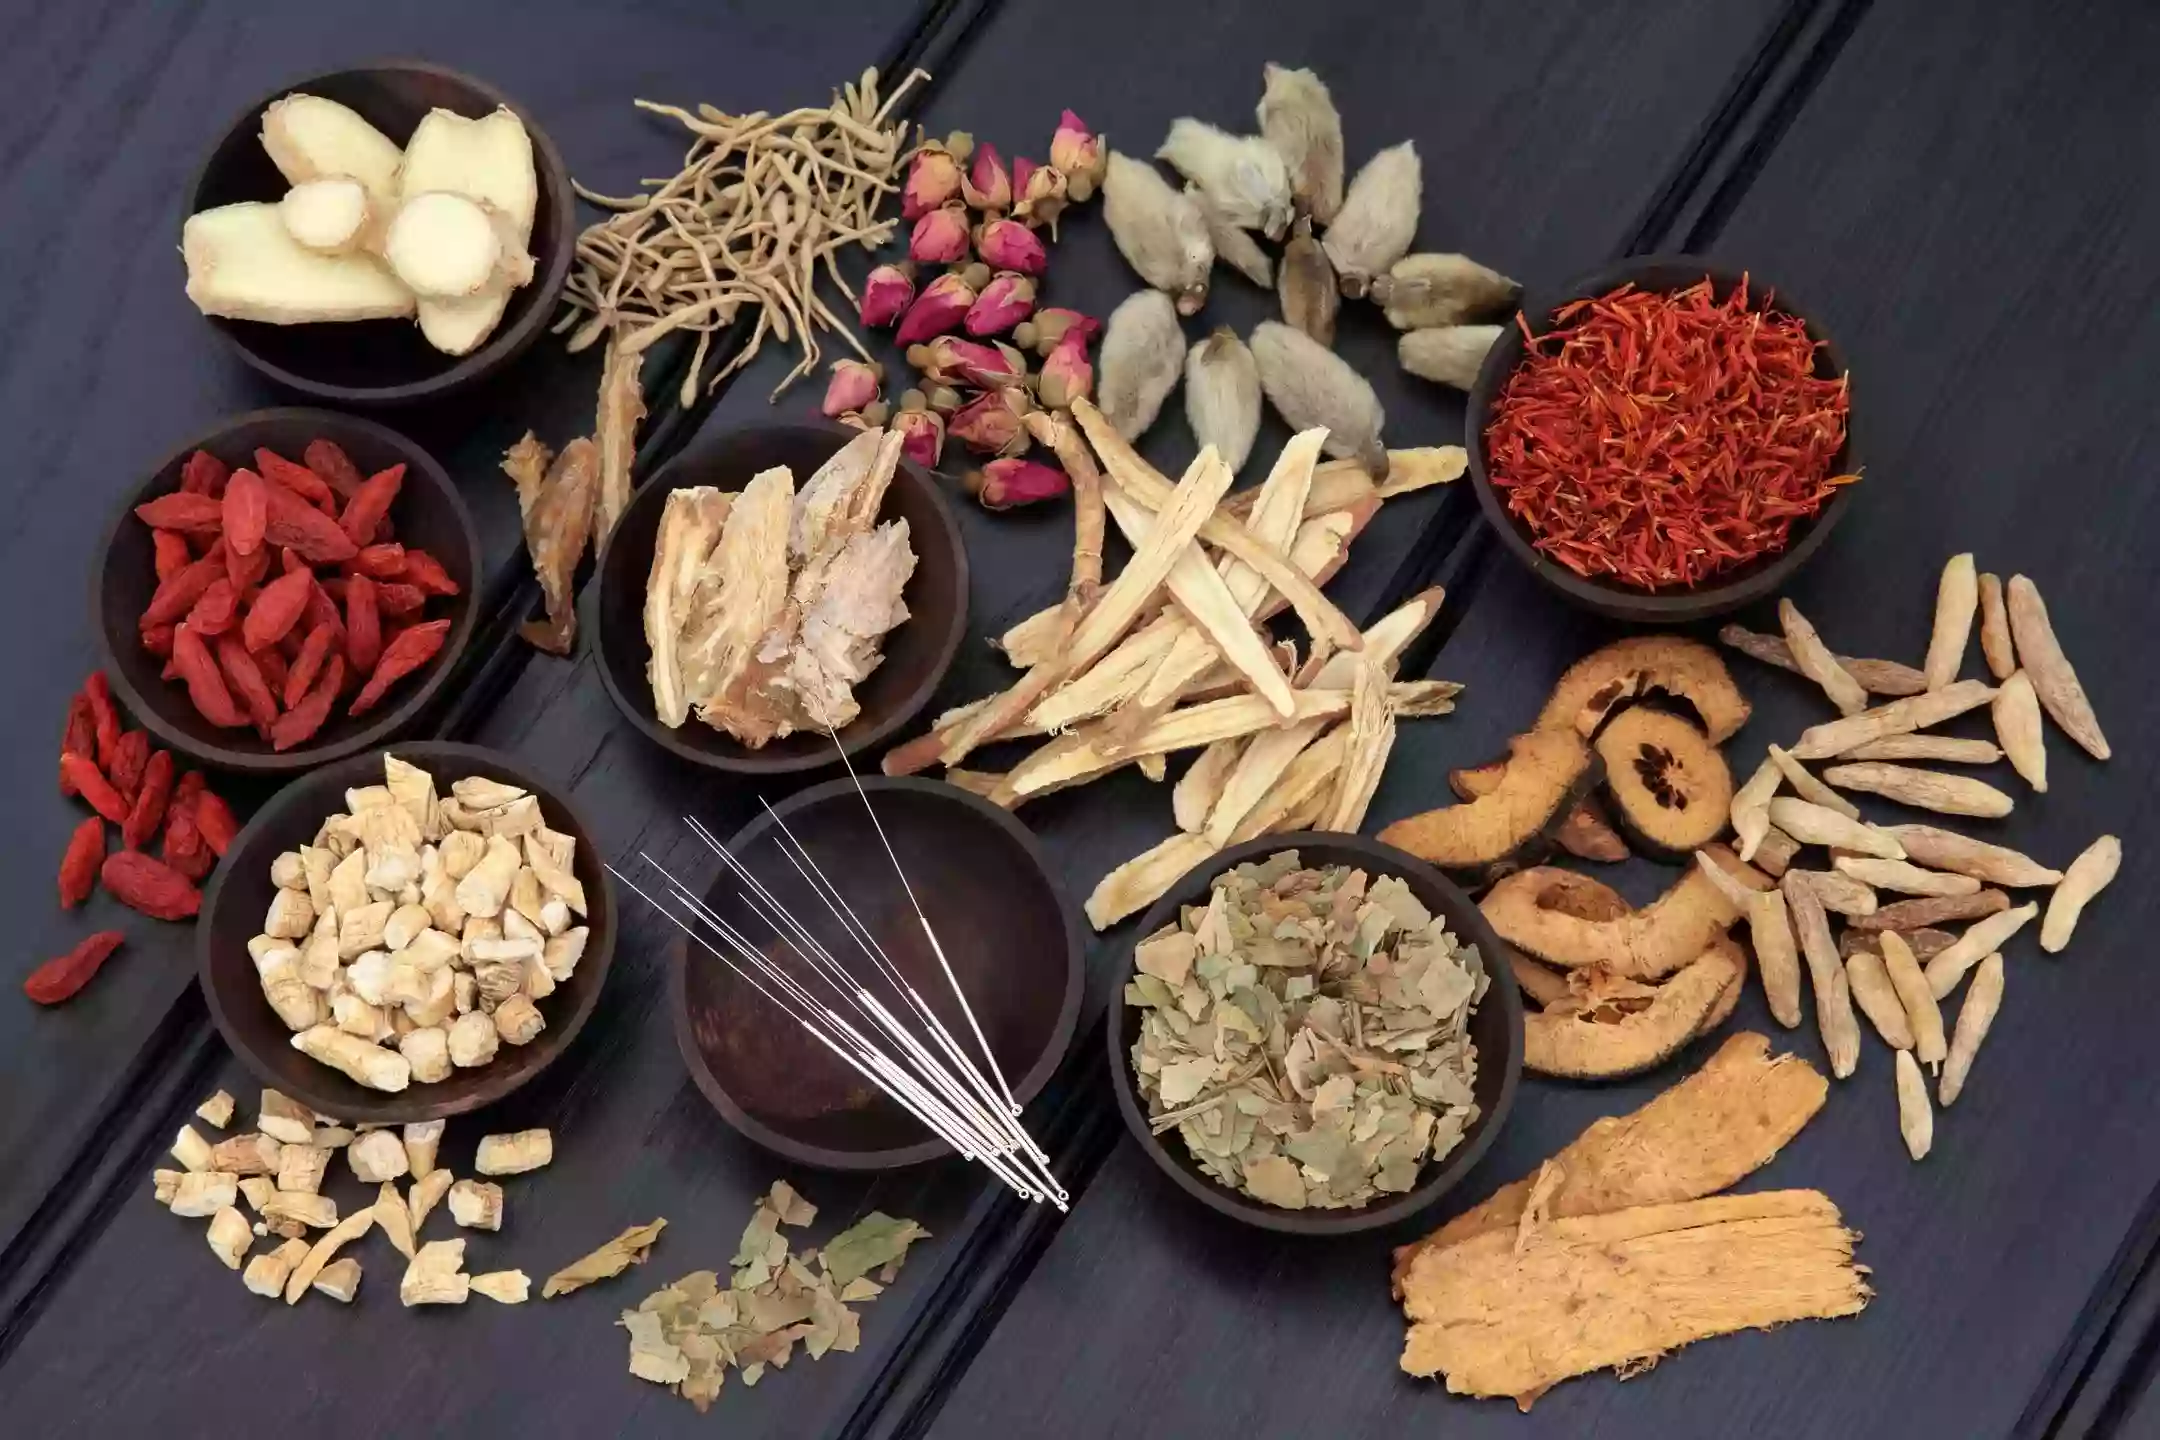 Family Acupuncture & Herbal Medicine: Laura Mayo